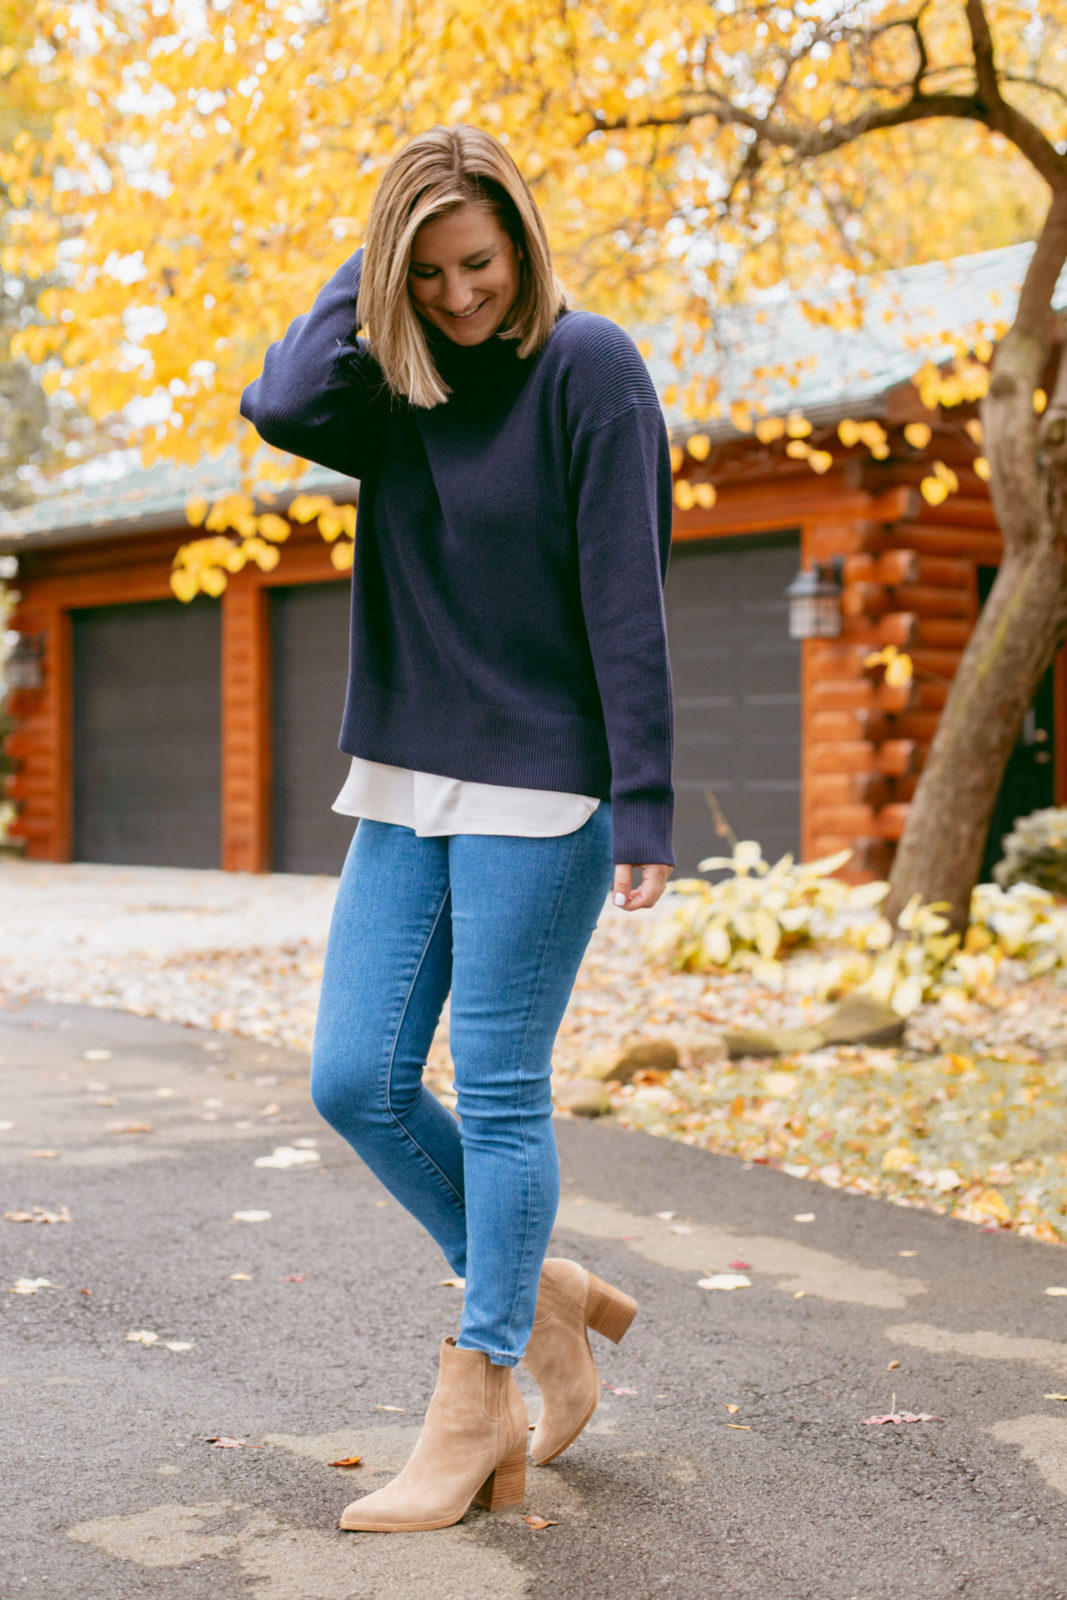 The 10 Best Sweaters & Cardigans for Fall - Living in Yellow